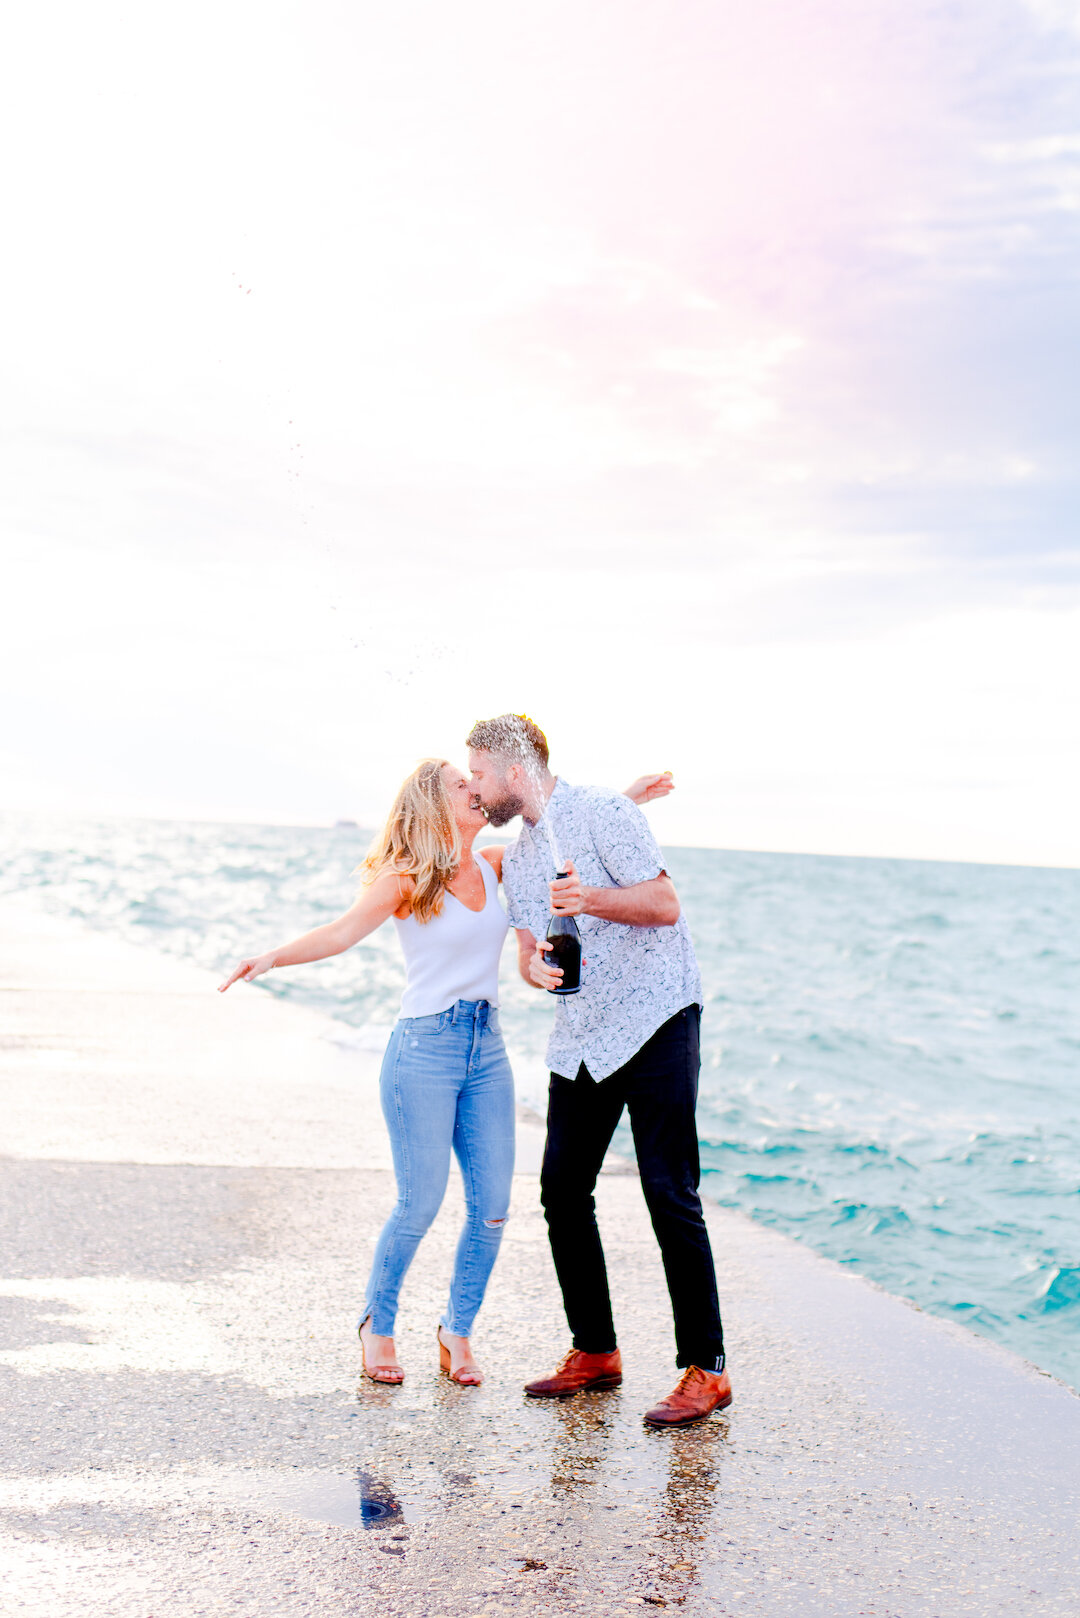 Romantic North Avenue Beach Engagement Shoot captured by Alana Lindenfeld Photography featured on CHI thee WED